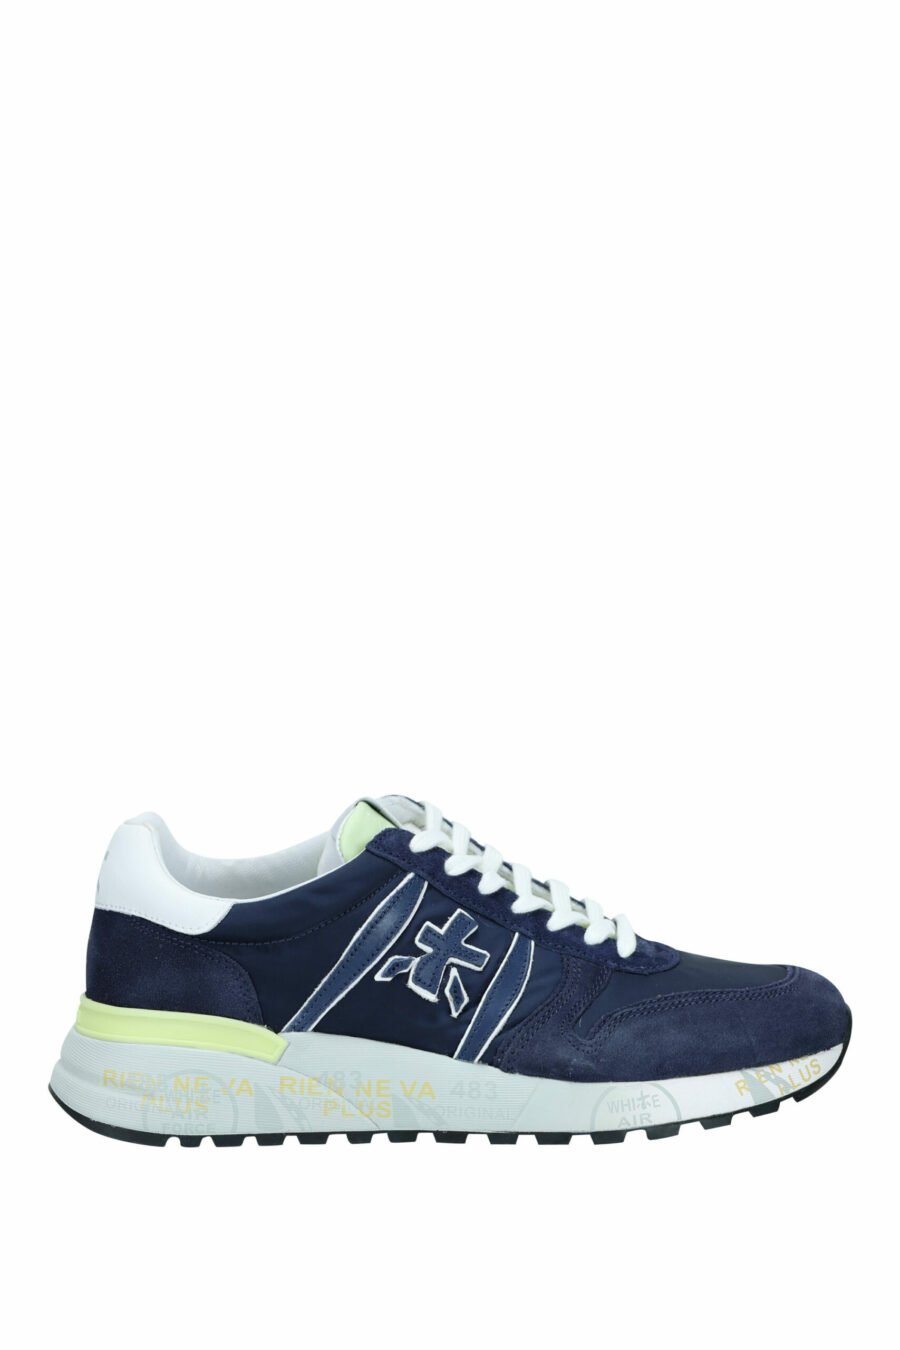 Blue trainers with lime green "Lander 6634" - 8053680268835 scaled